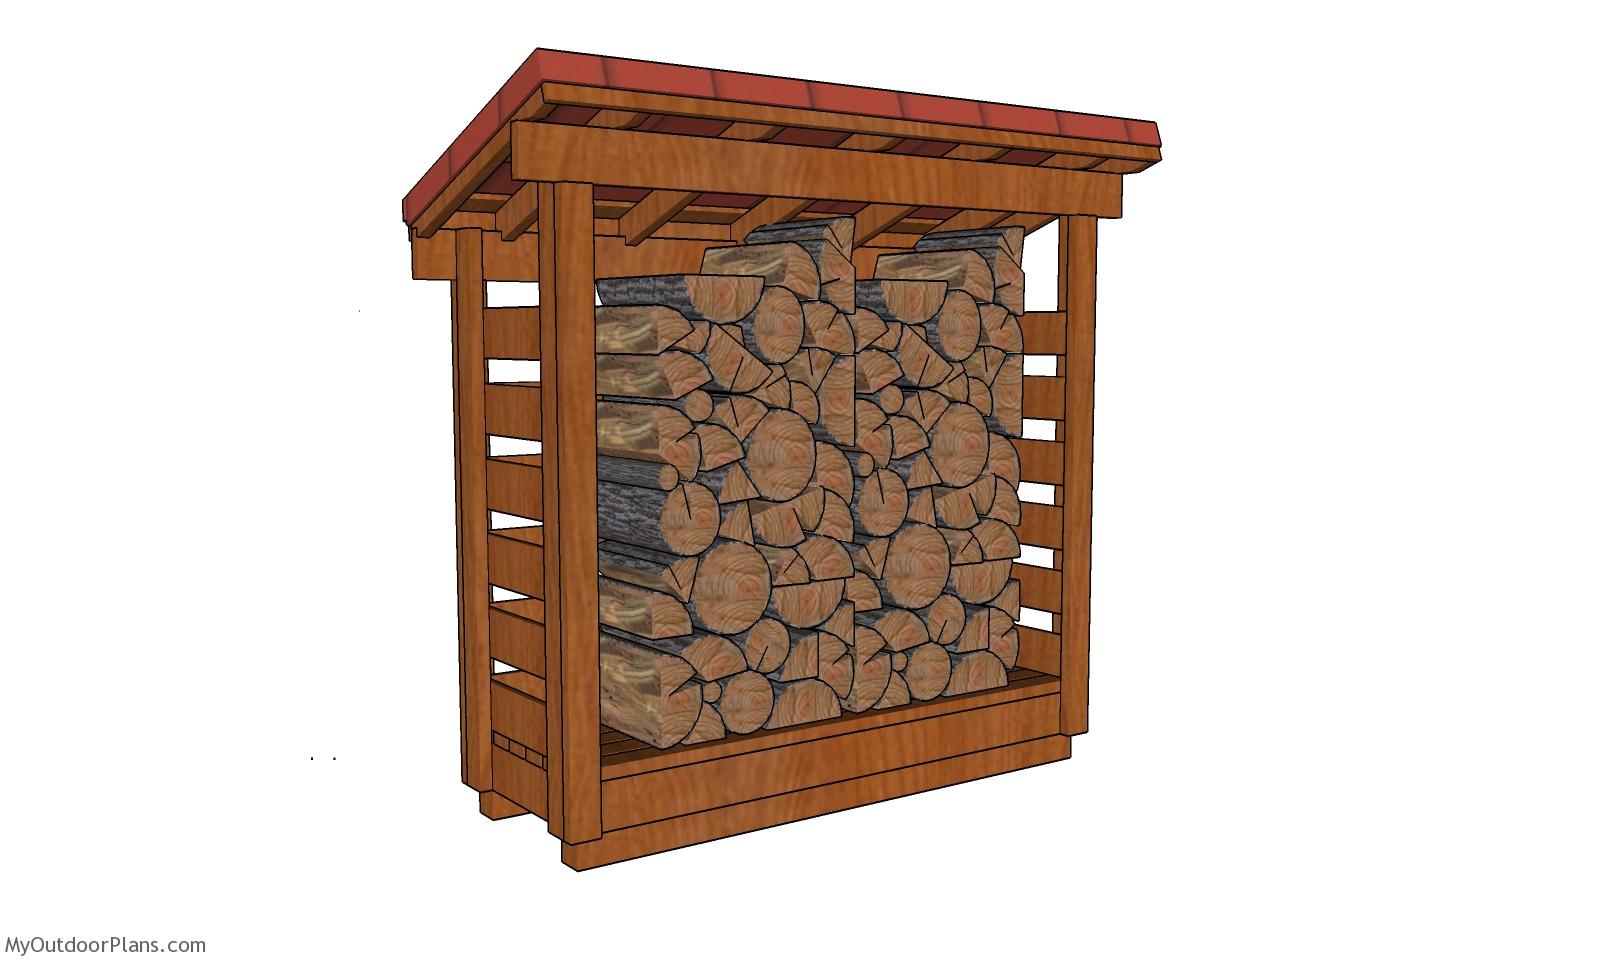 2×6 Half Cord Firewood Shed Plans